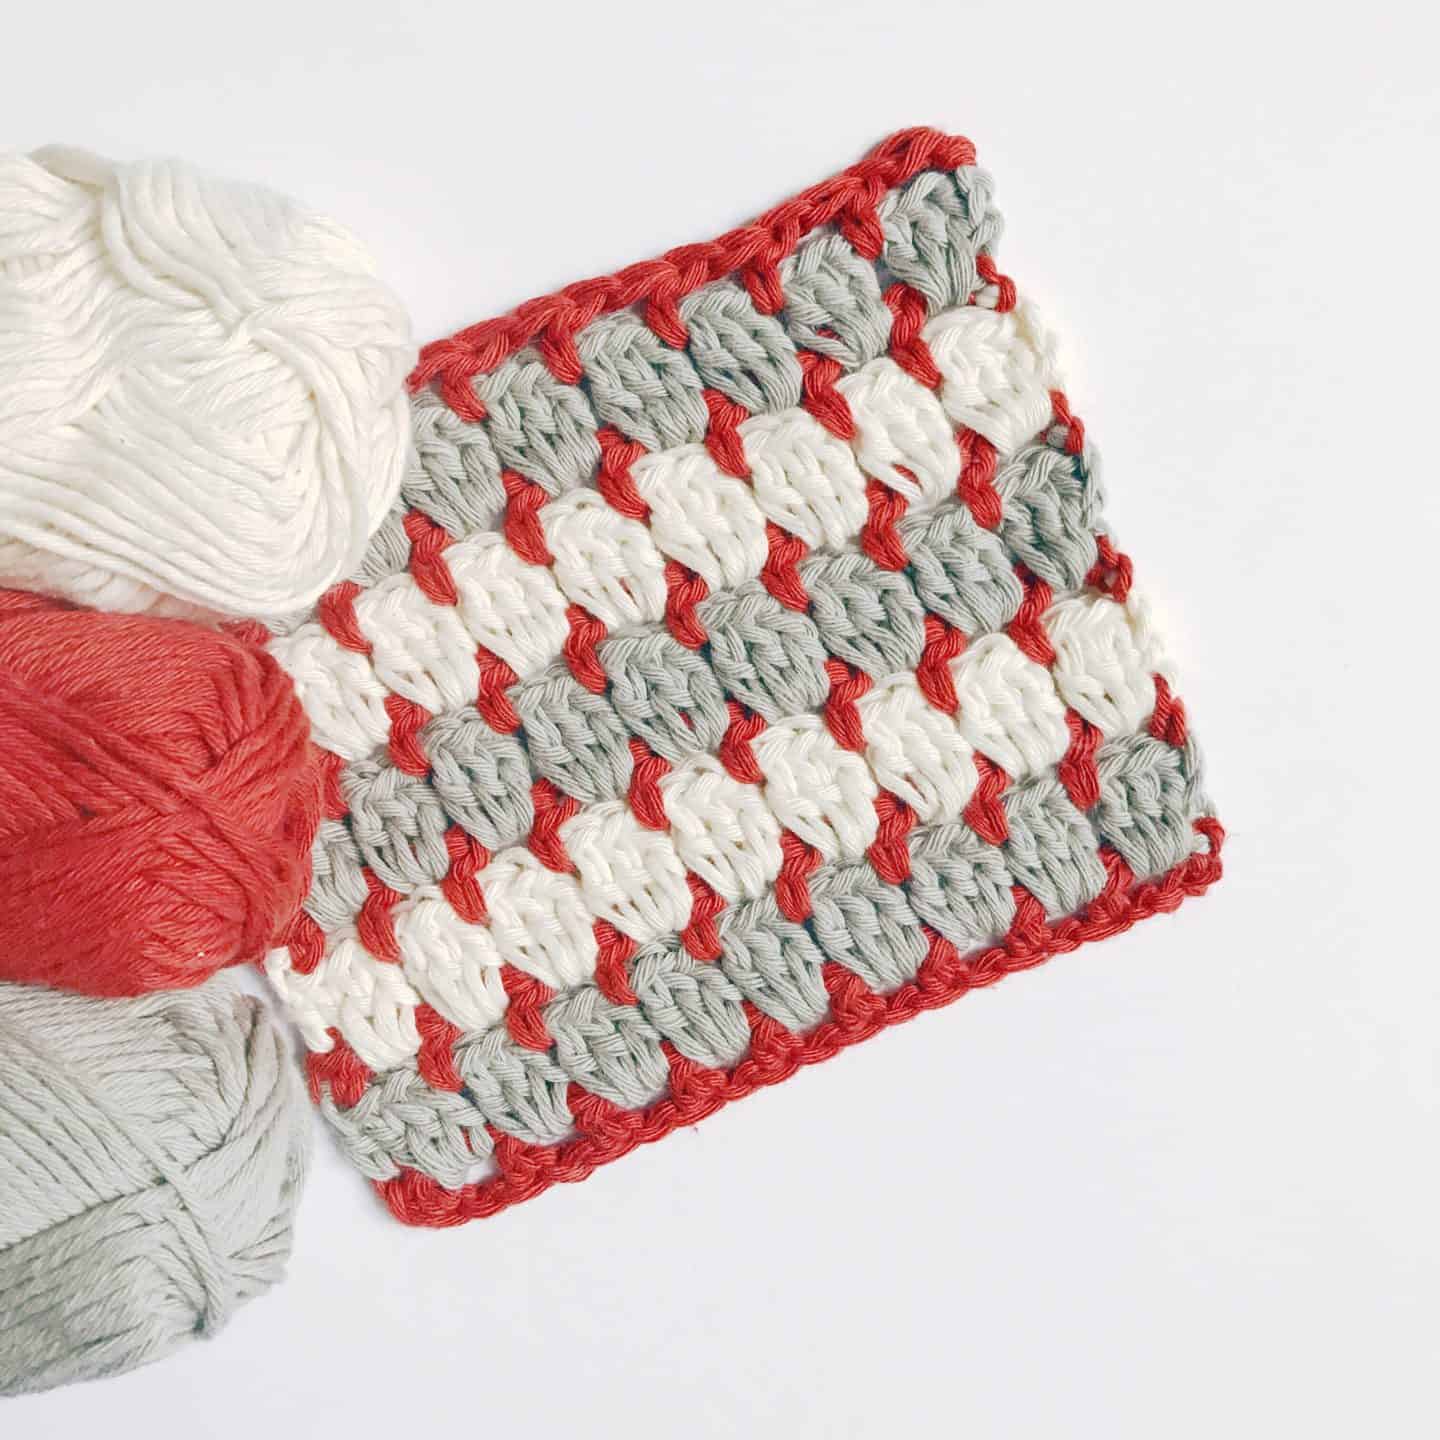 Learn to crochet the granny block crochet stitch with this easy step by step crochet tutorial for beginners. A twist on the classic crochet granny square, the granny block stitch is worked in rows instead of rounds and so is much easier to master. The free crochet blanket pattern and stitch tutorial are in both US and UK crochet terms. 